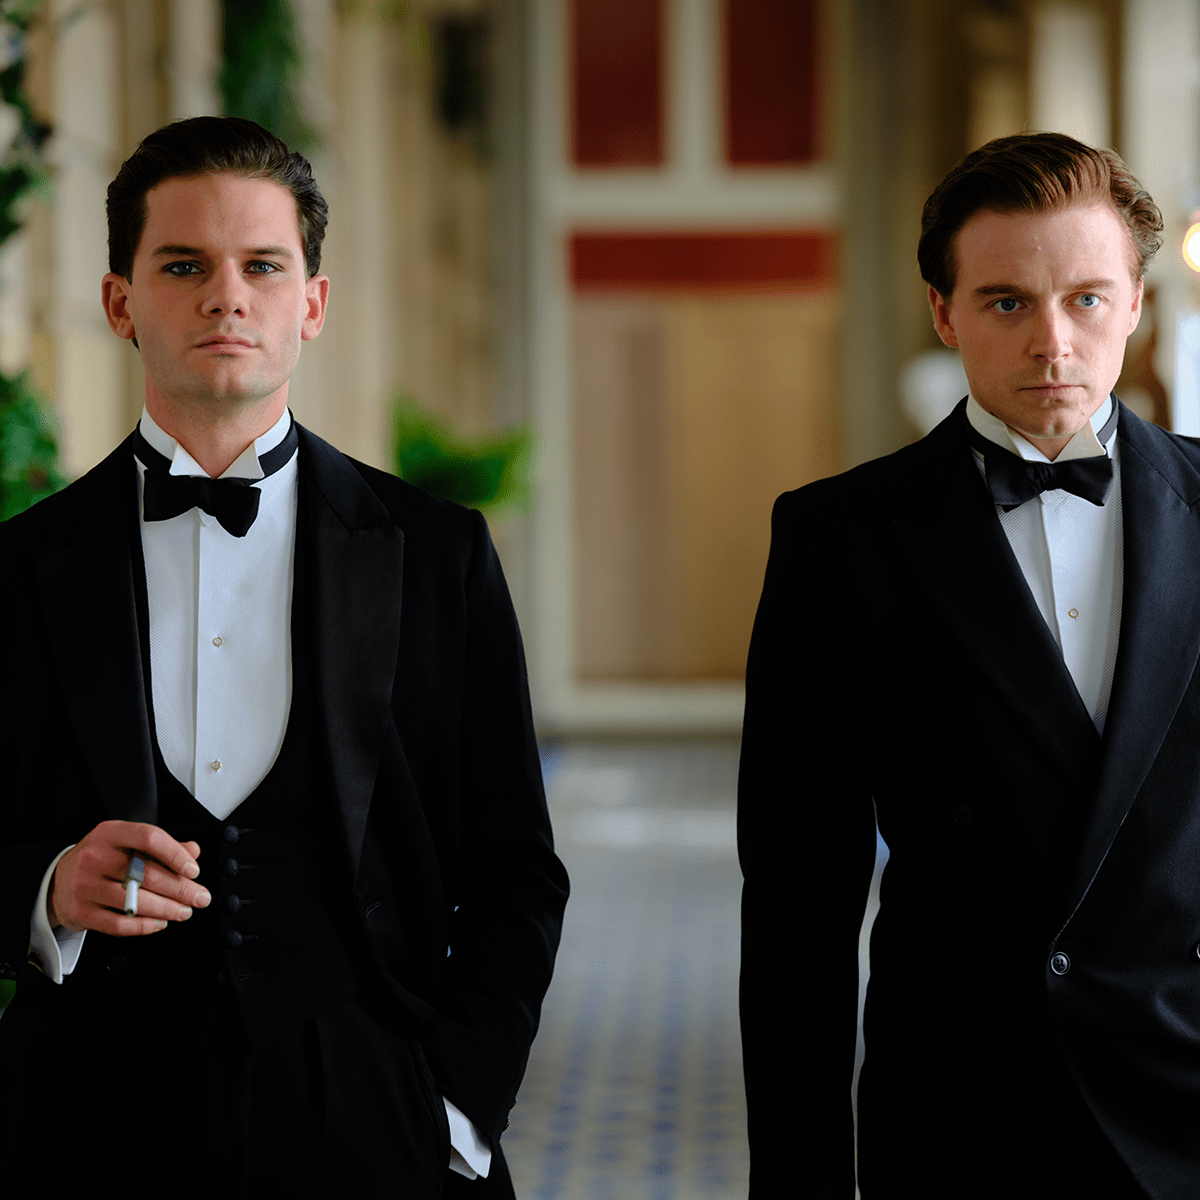 Two people in suits with bowties walking down a hallway